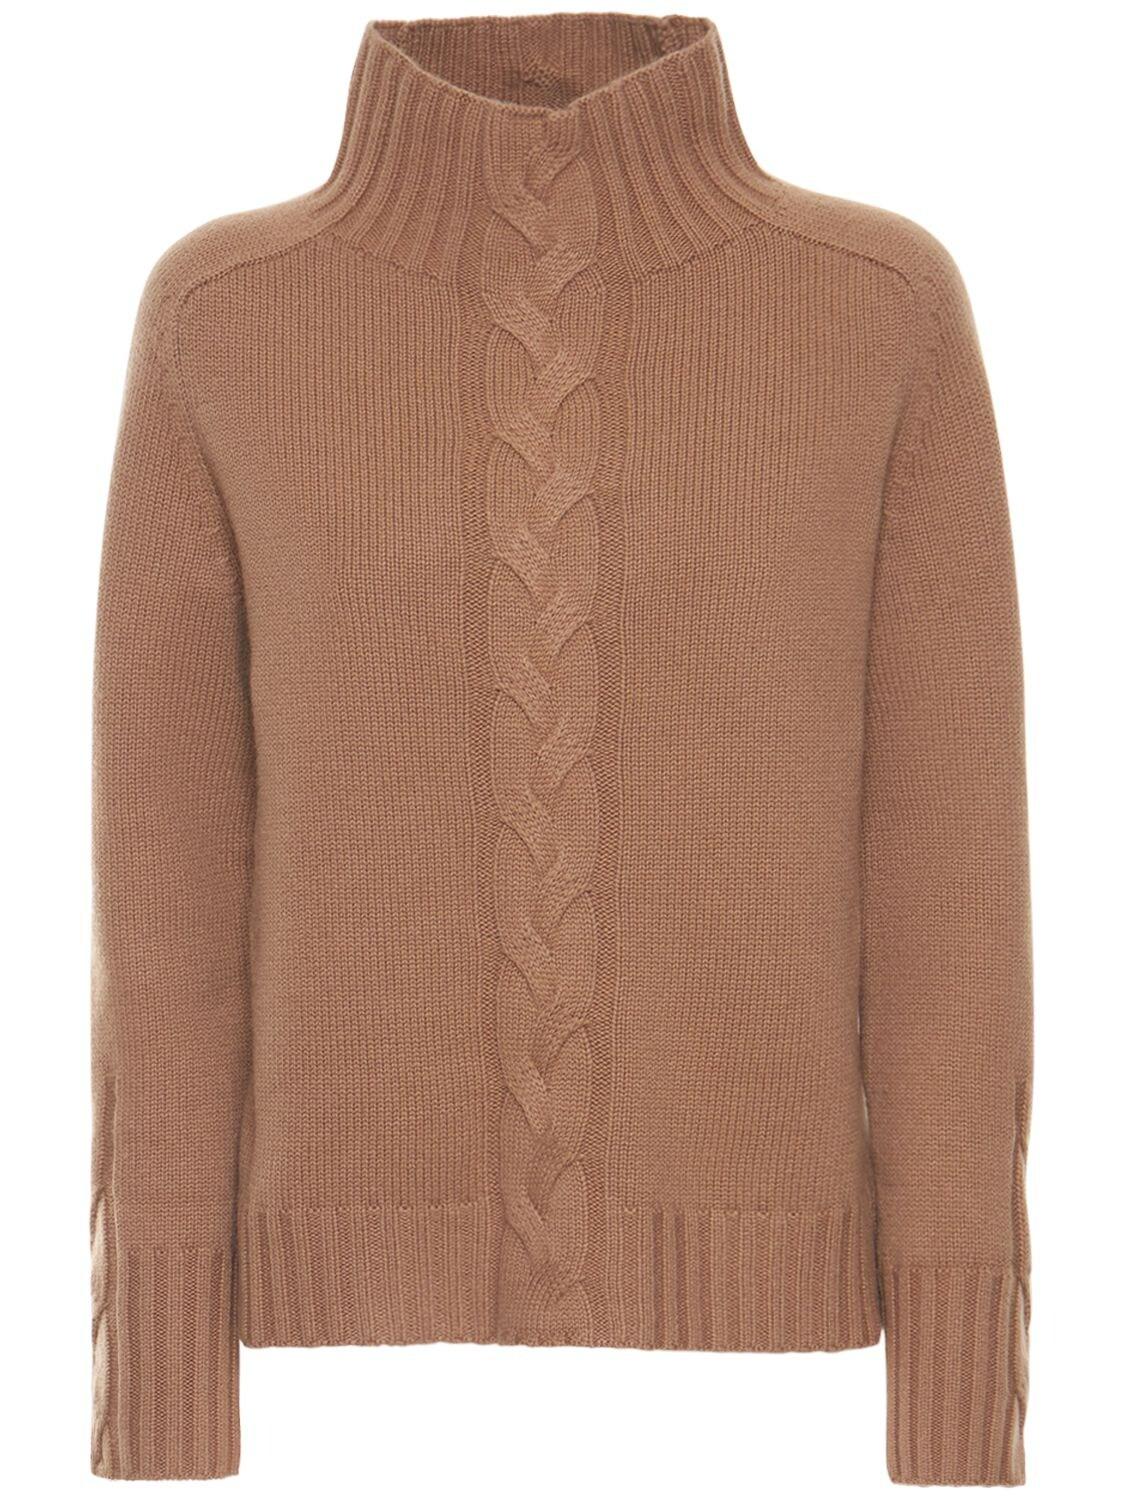 Max Mara Oceania Cable Knit Sweater in Camel (Brown) | Lyst